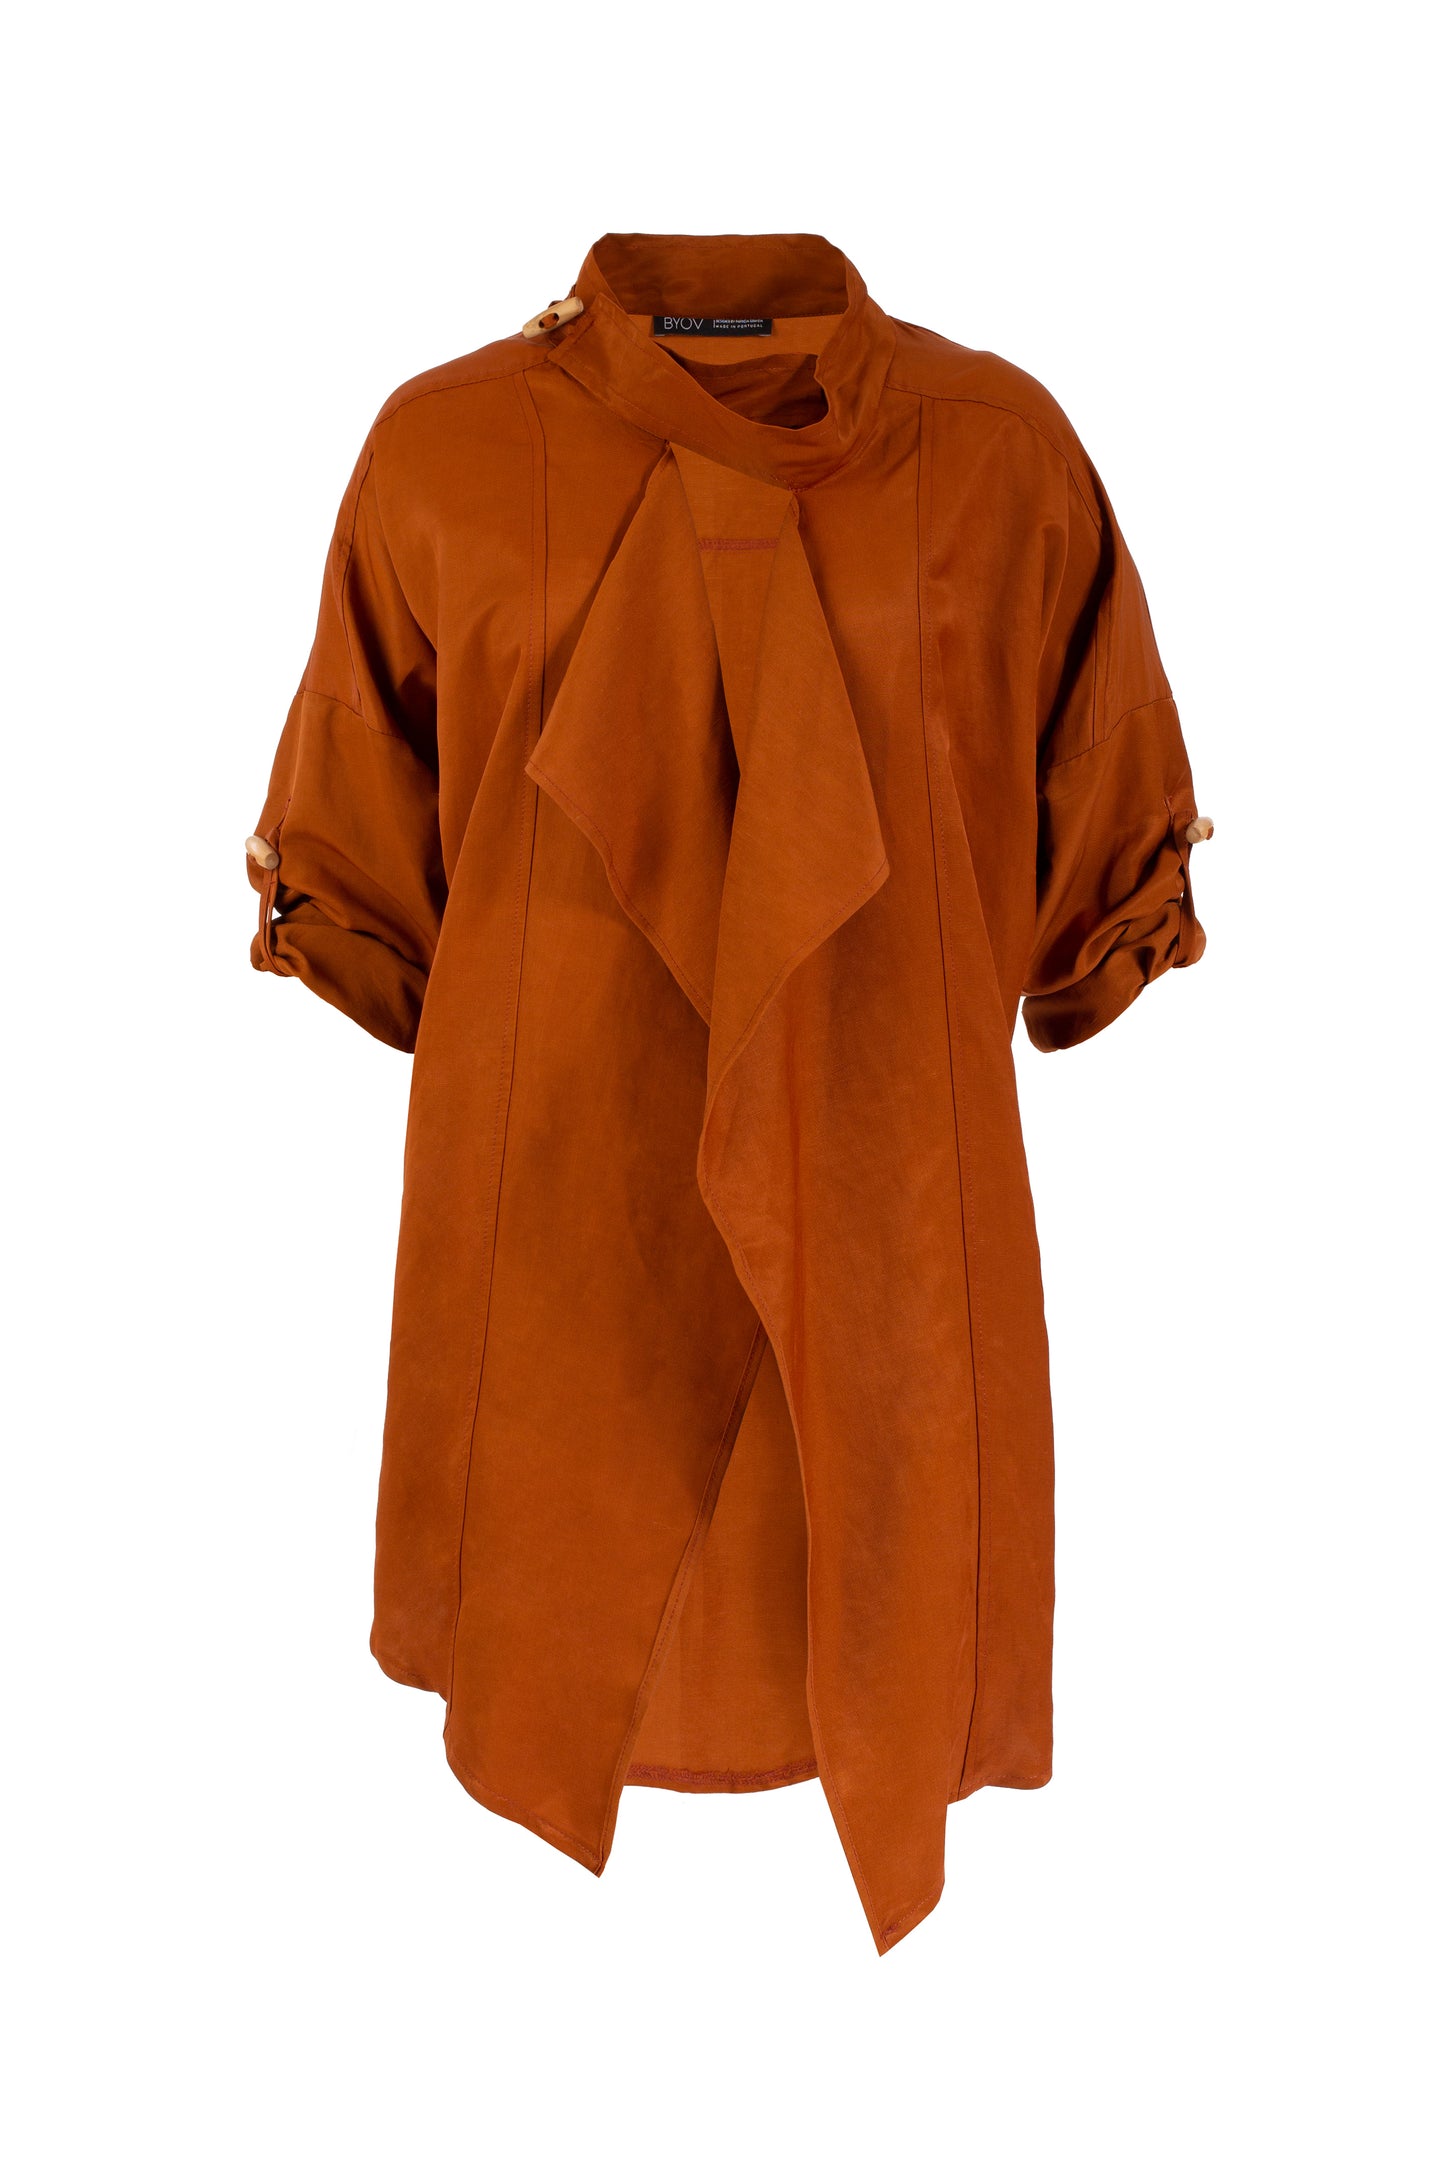 9756 - BENGUELA - TERRACOTTA TRENCH -BYOU by Patricia Gouveia